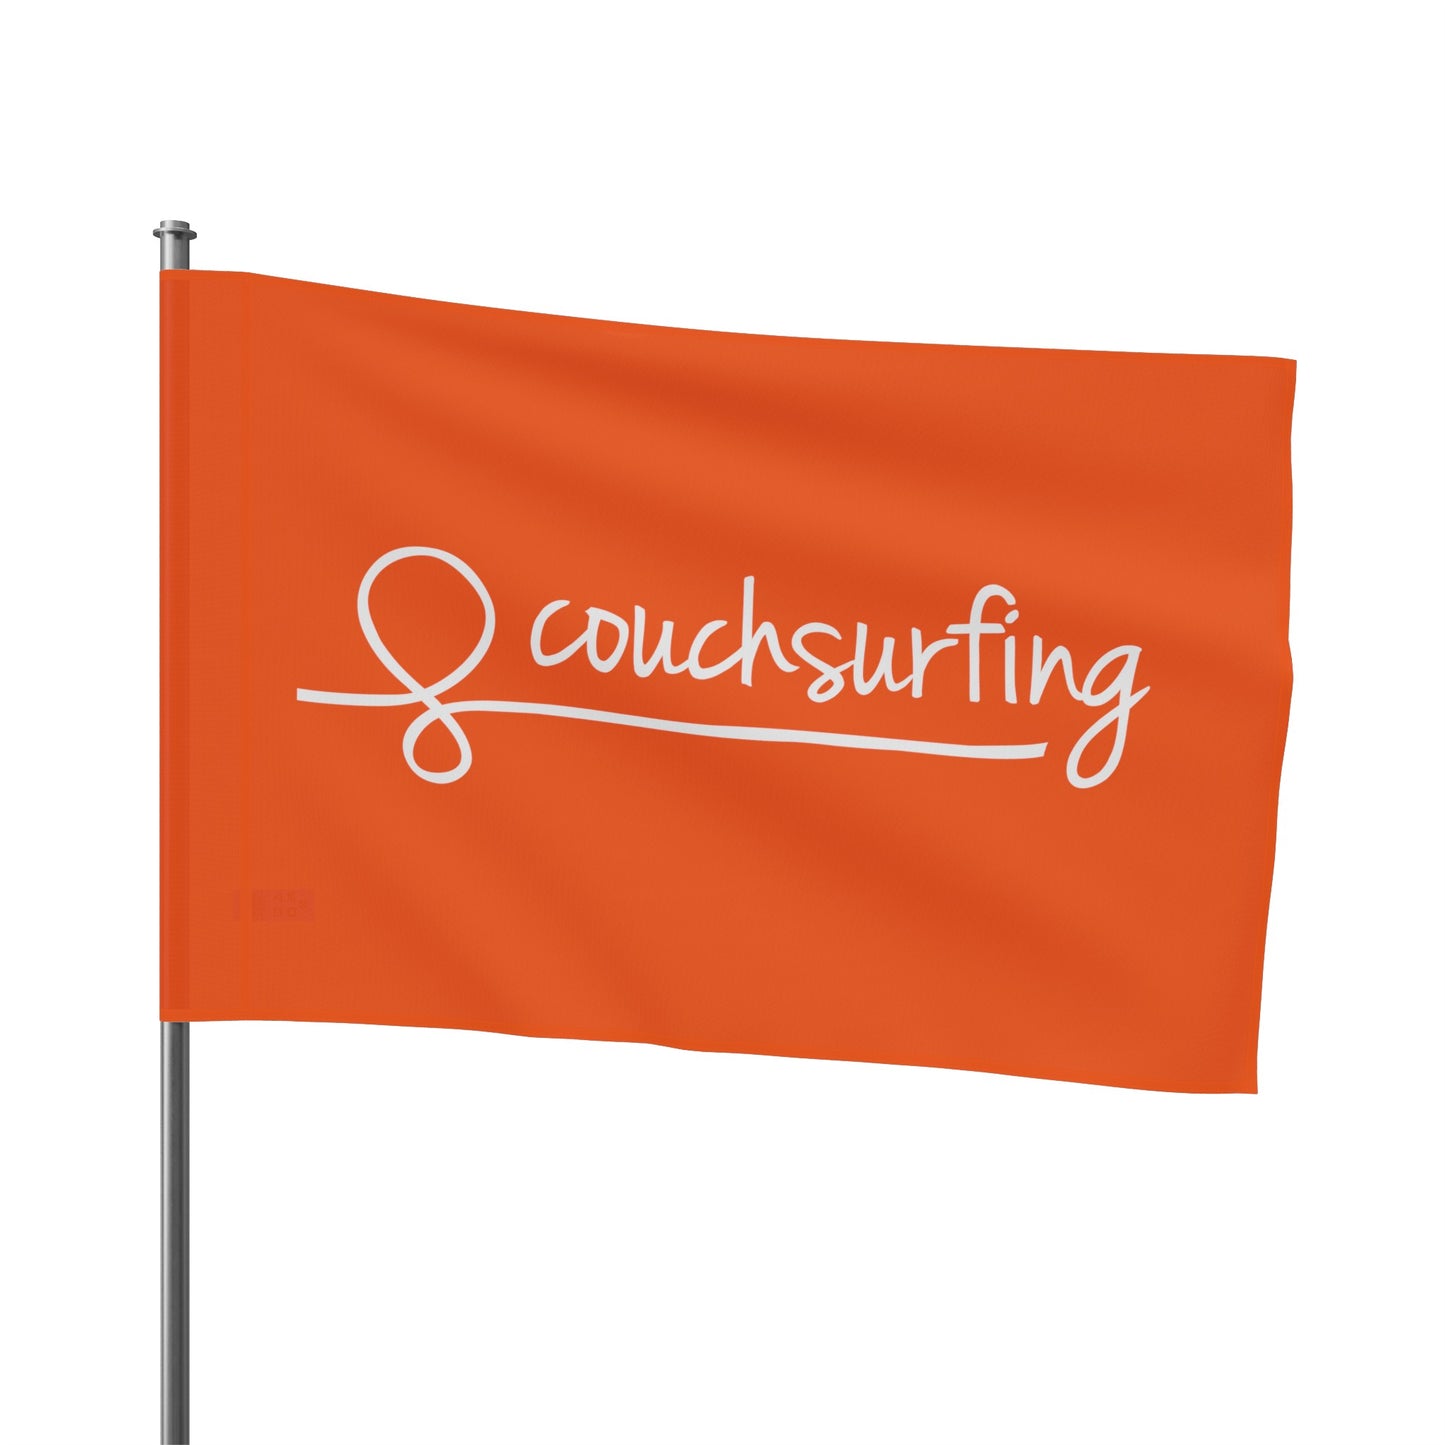 The Couchsurfing Flag